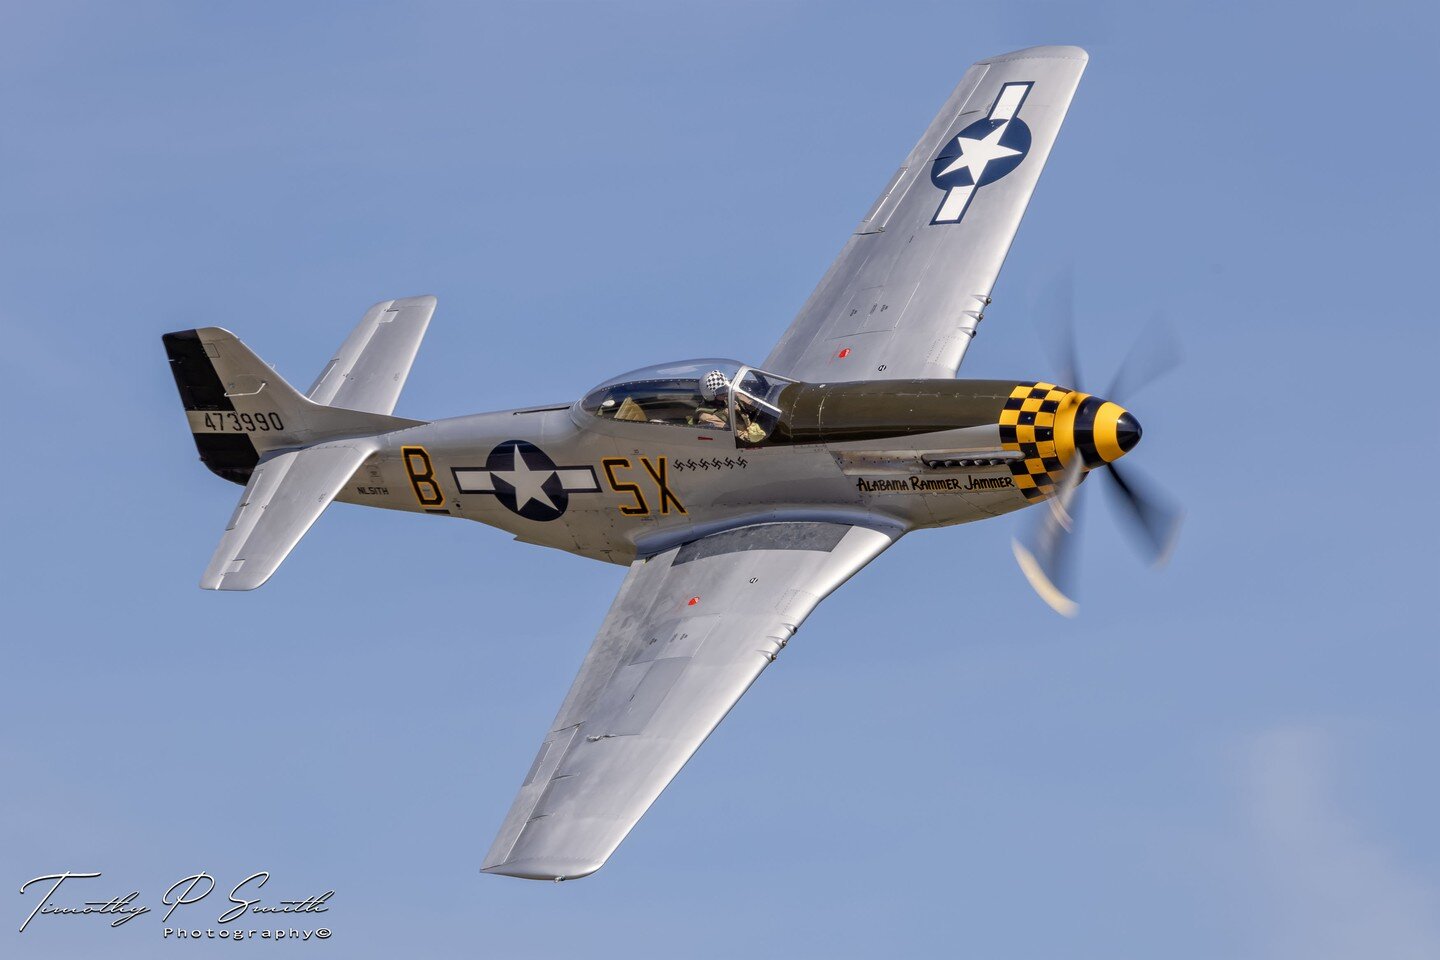 ⠀⠀⠀⠀⠀⠀⠀⠀
83 years of the Mighty P-51 Mustang

Mark Henley and his beautiful Mustang &lsquo;Alabama Rammer Jammer&rdquo; with the Photo pass!

Happy 83rd anniversary to the North American P-51 Mustang! It's indeed a magnificent and beloved warbird wit